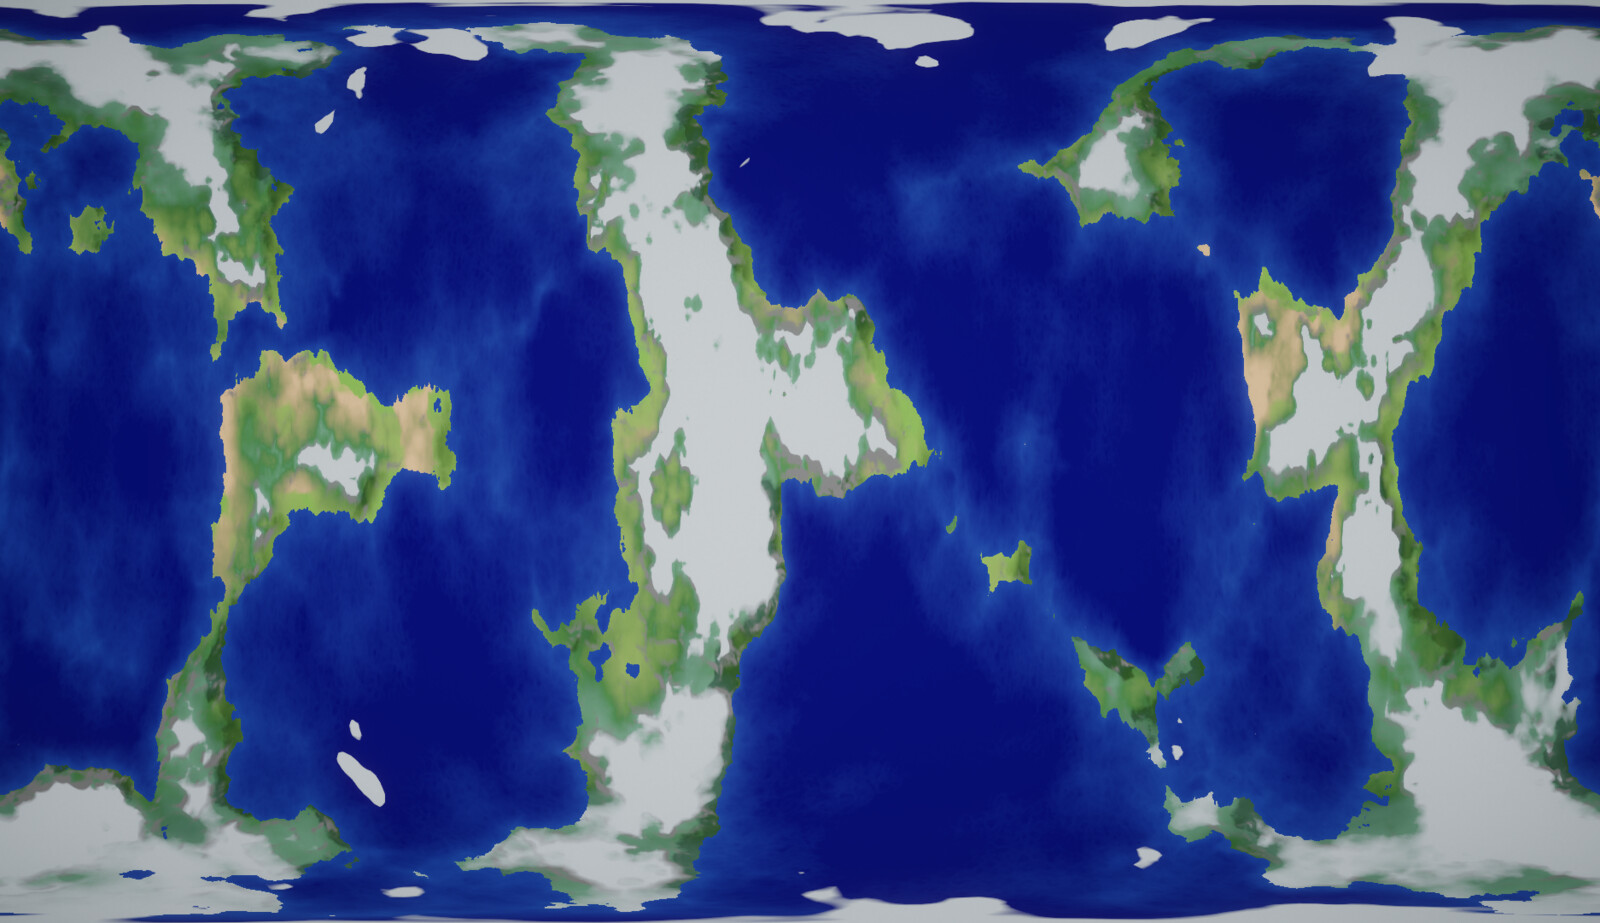 It can also generate Mercator-projection maps.